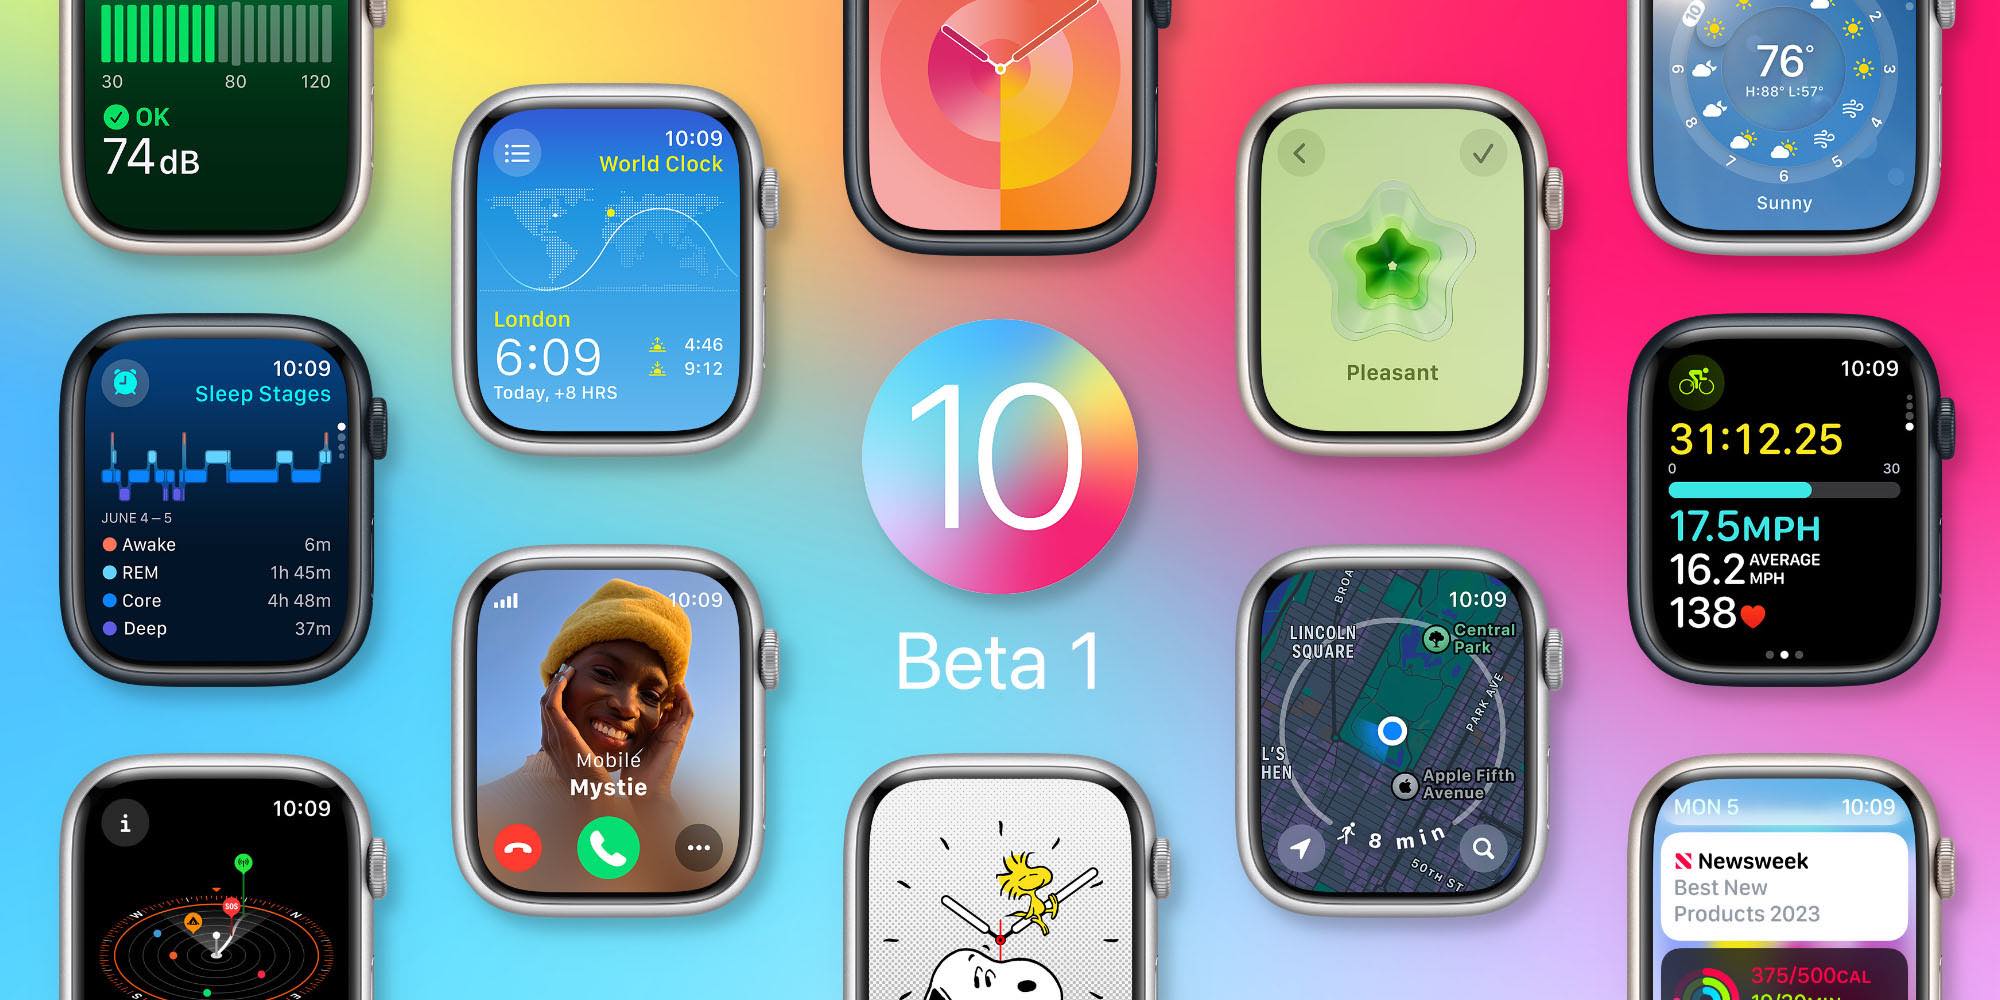 Hands On With Apple's WatchOS 7 Beta | PCMag